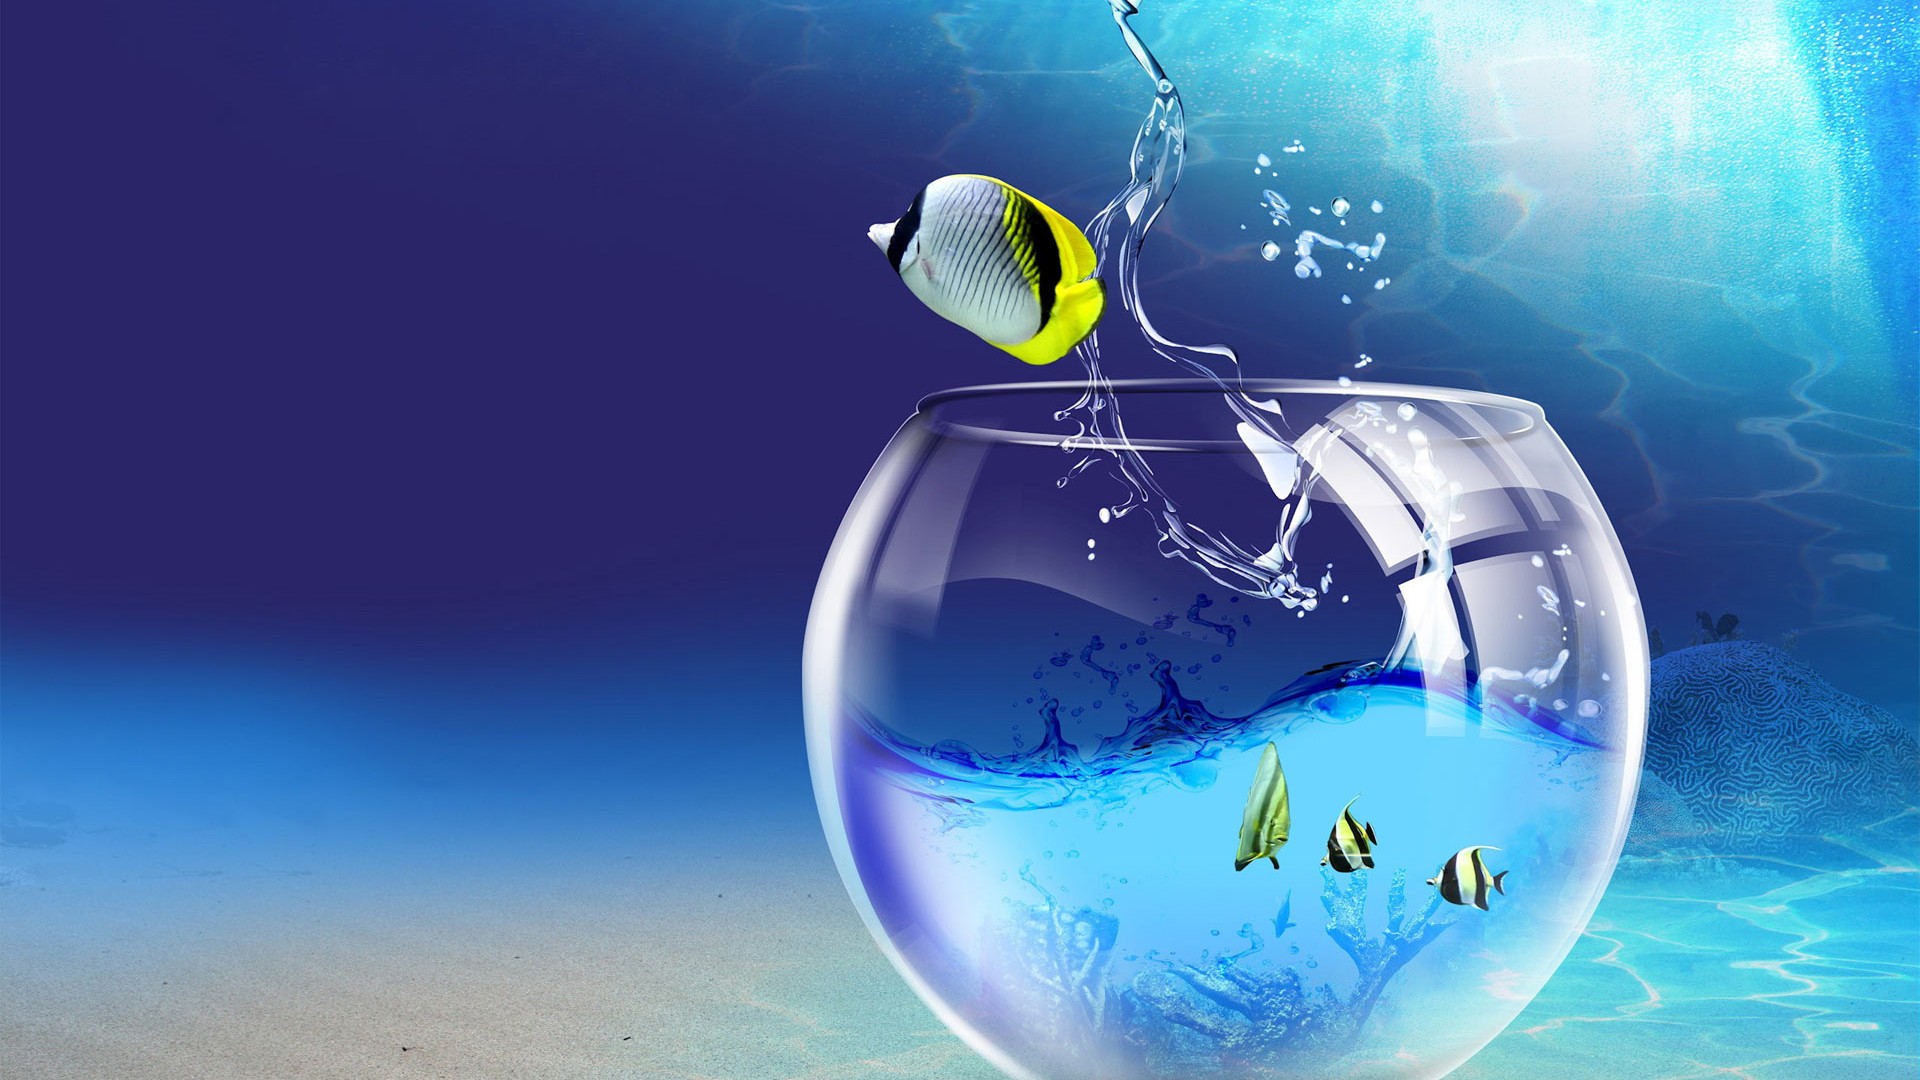 Free download Water 3D Wallpaper 1920x1080 Water 3D View Abstract